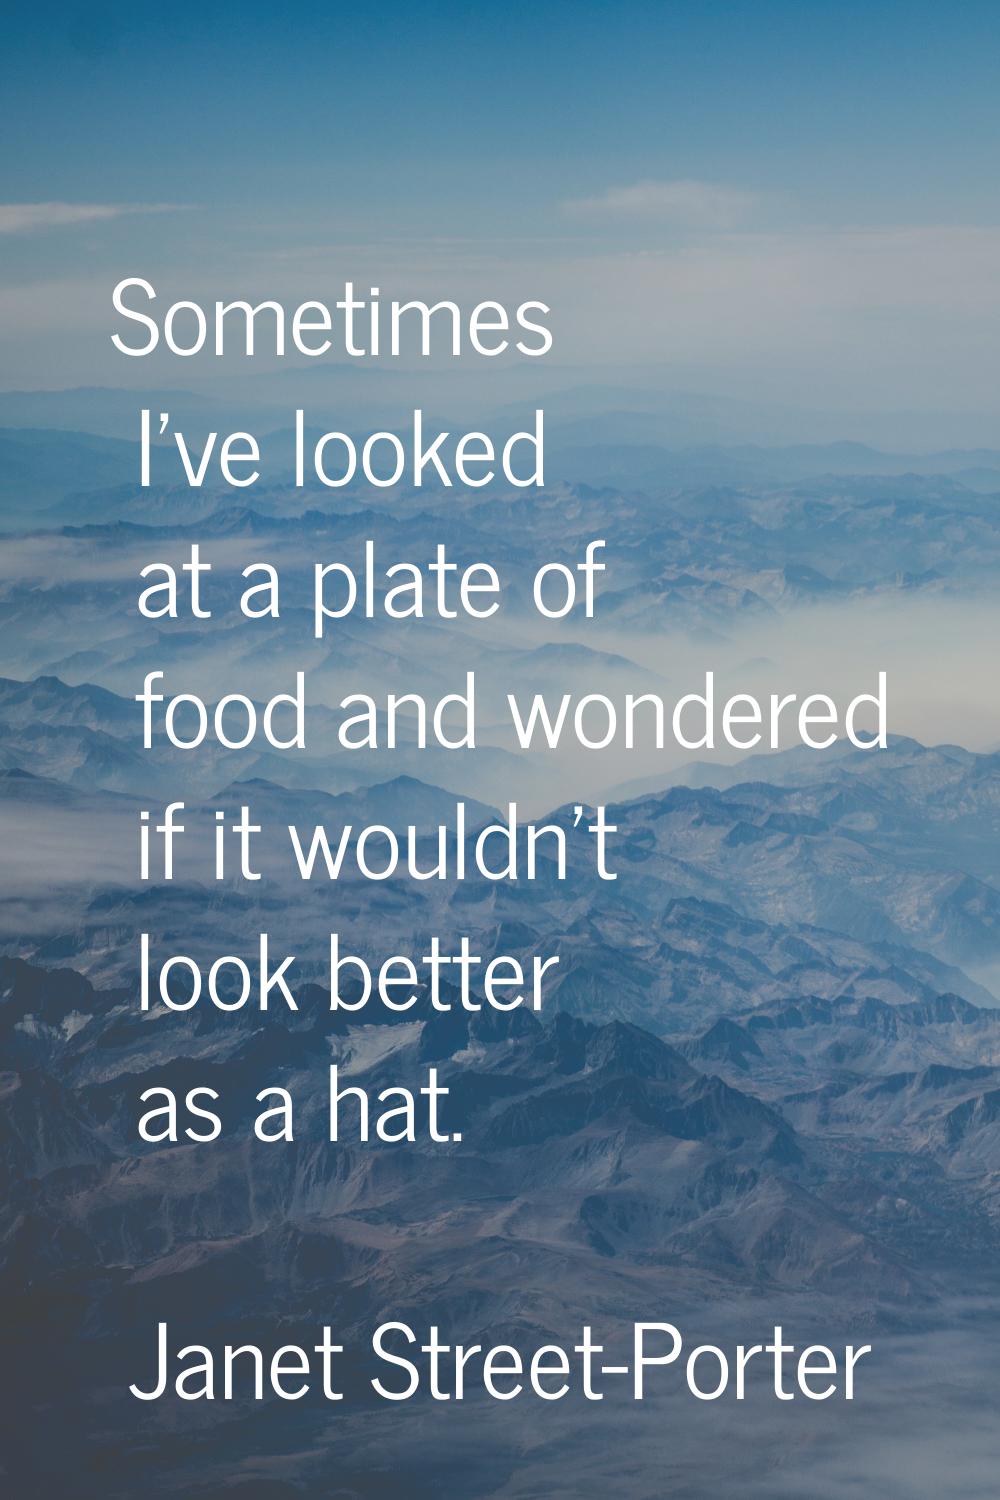 Sometimes I've looked at a plate of food and wondered if it wouldn't look better as a hat.